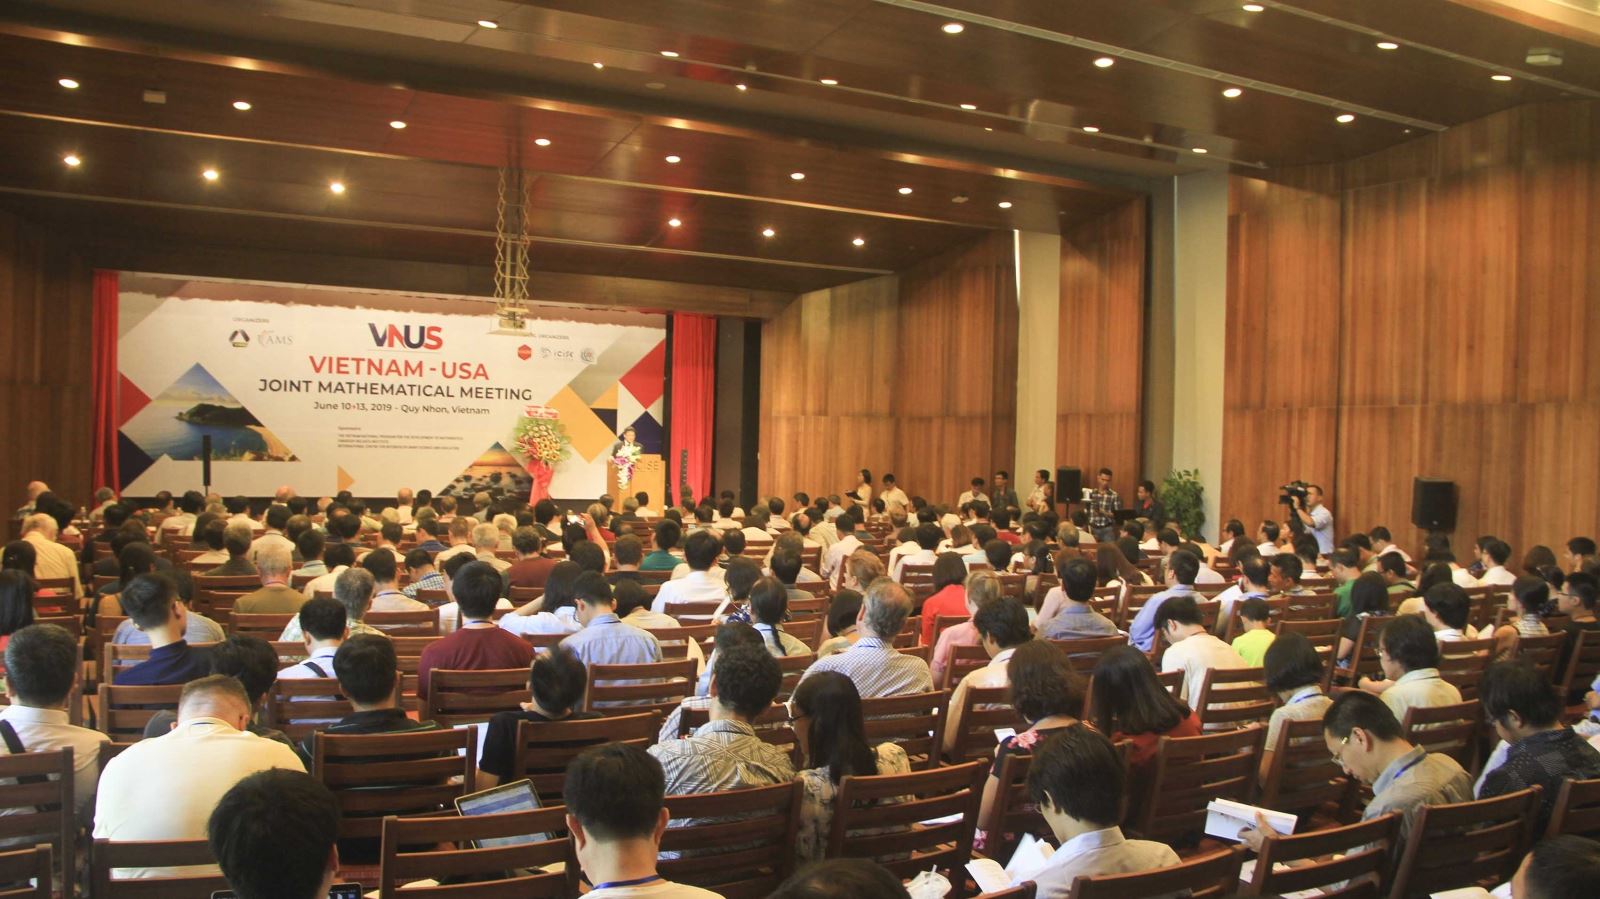 Vietnam-US mathematical conference opens in Binh Dinh